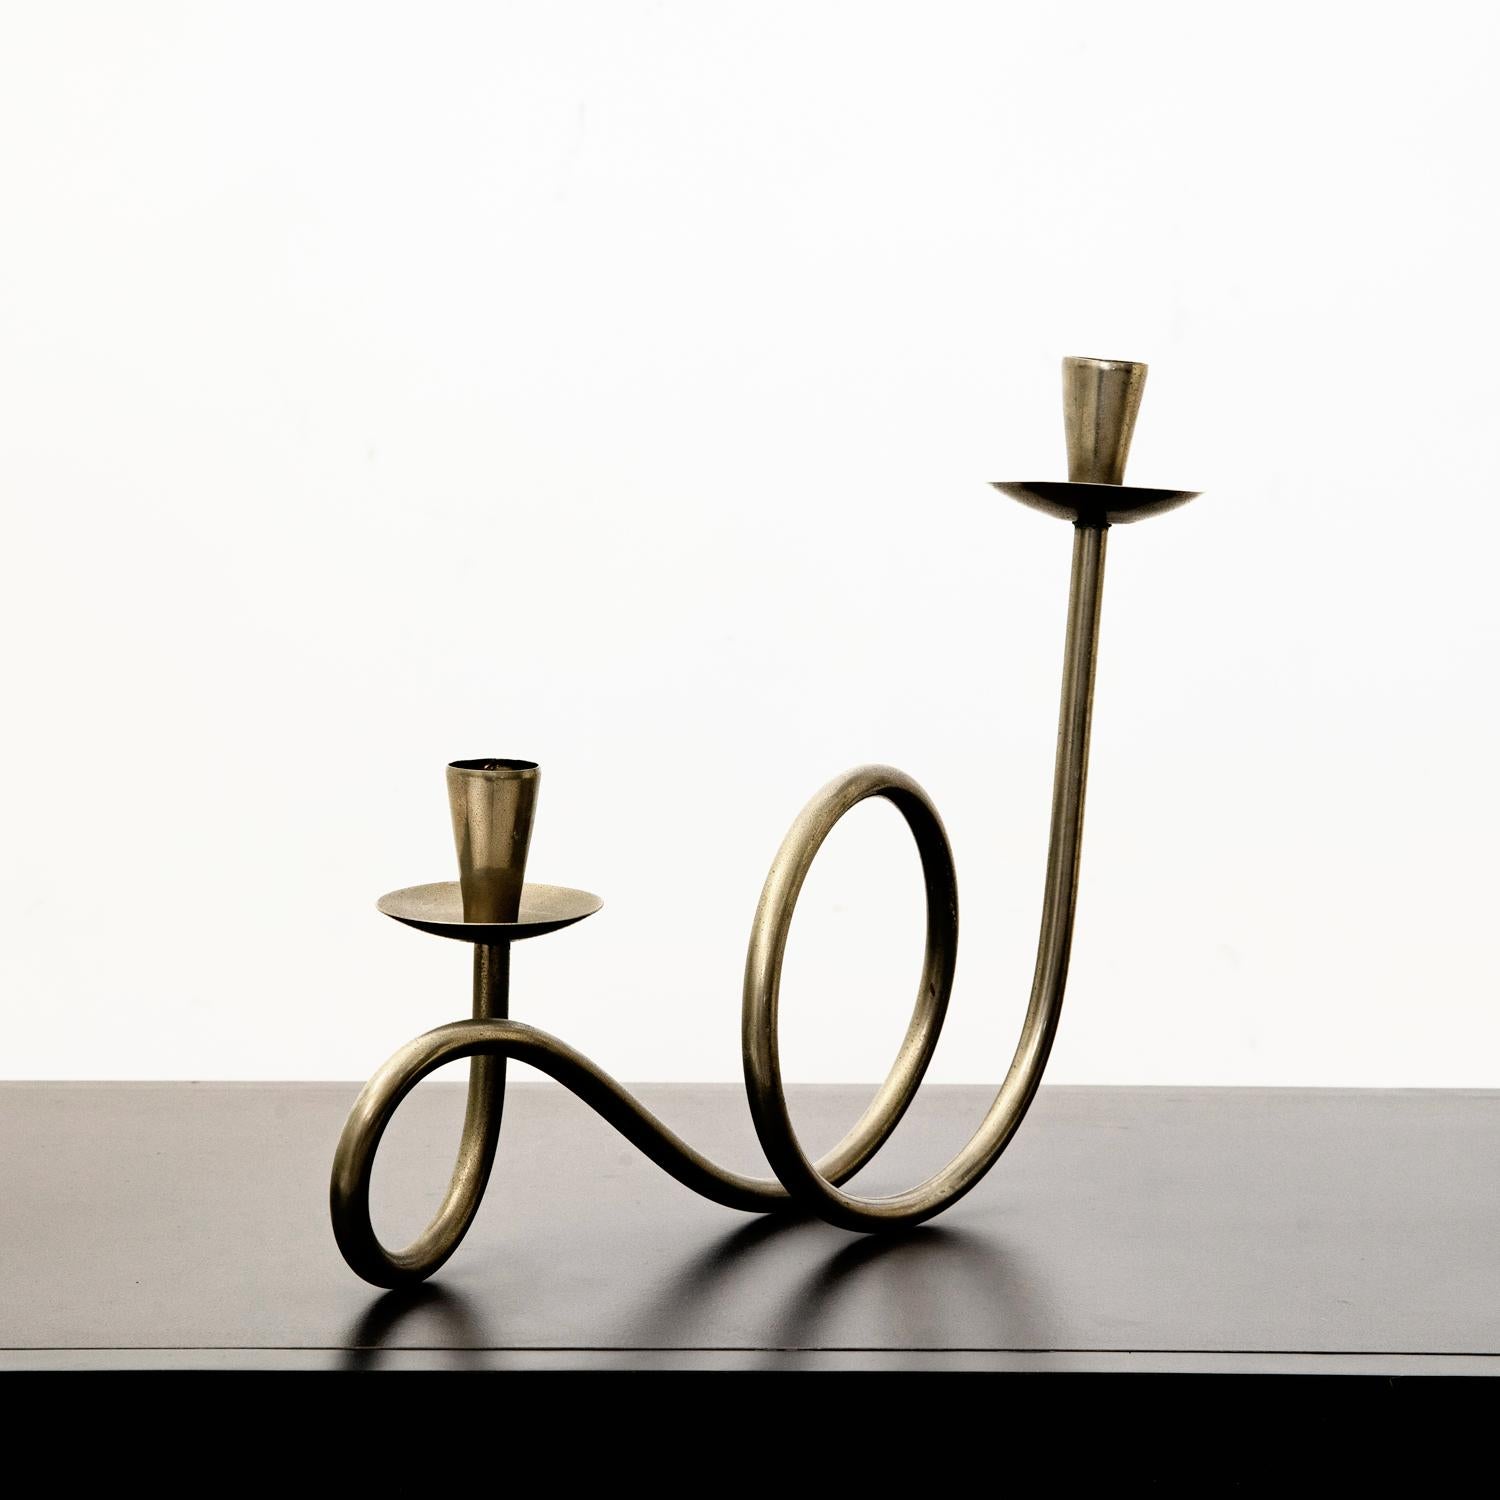 Silver Plate Pair of T8 Candlesticks by Piero De Vecchi for the 8th Triennale of Milan, 1947